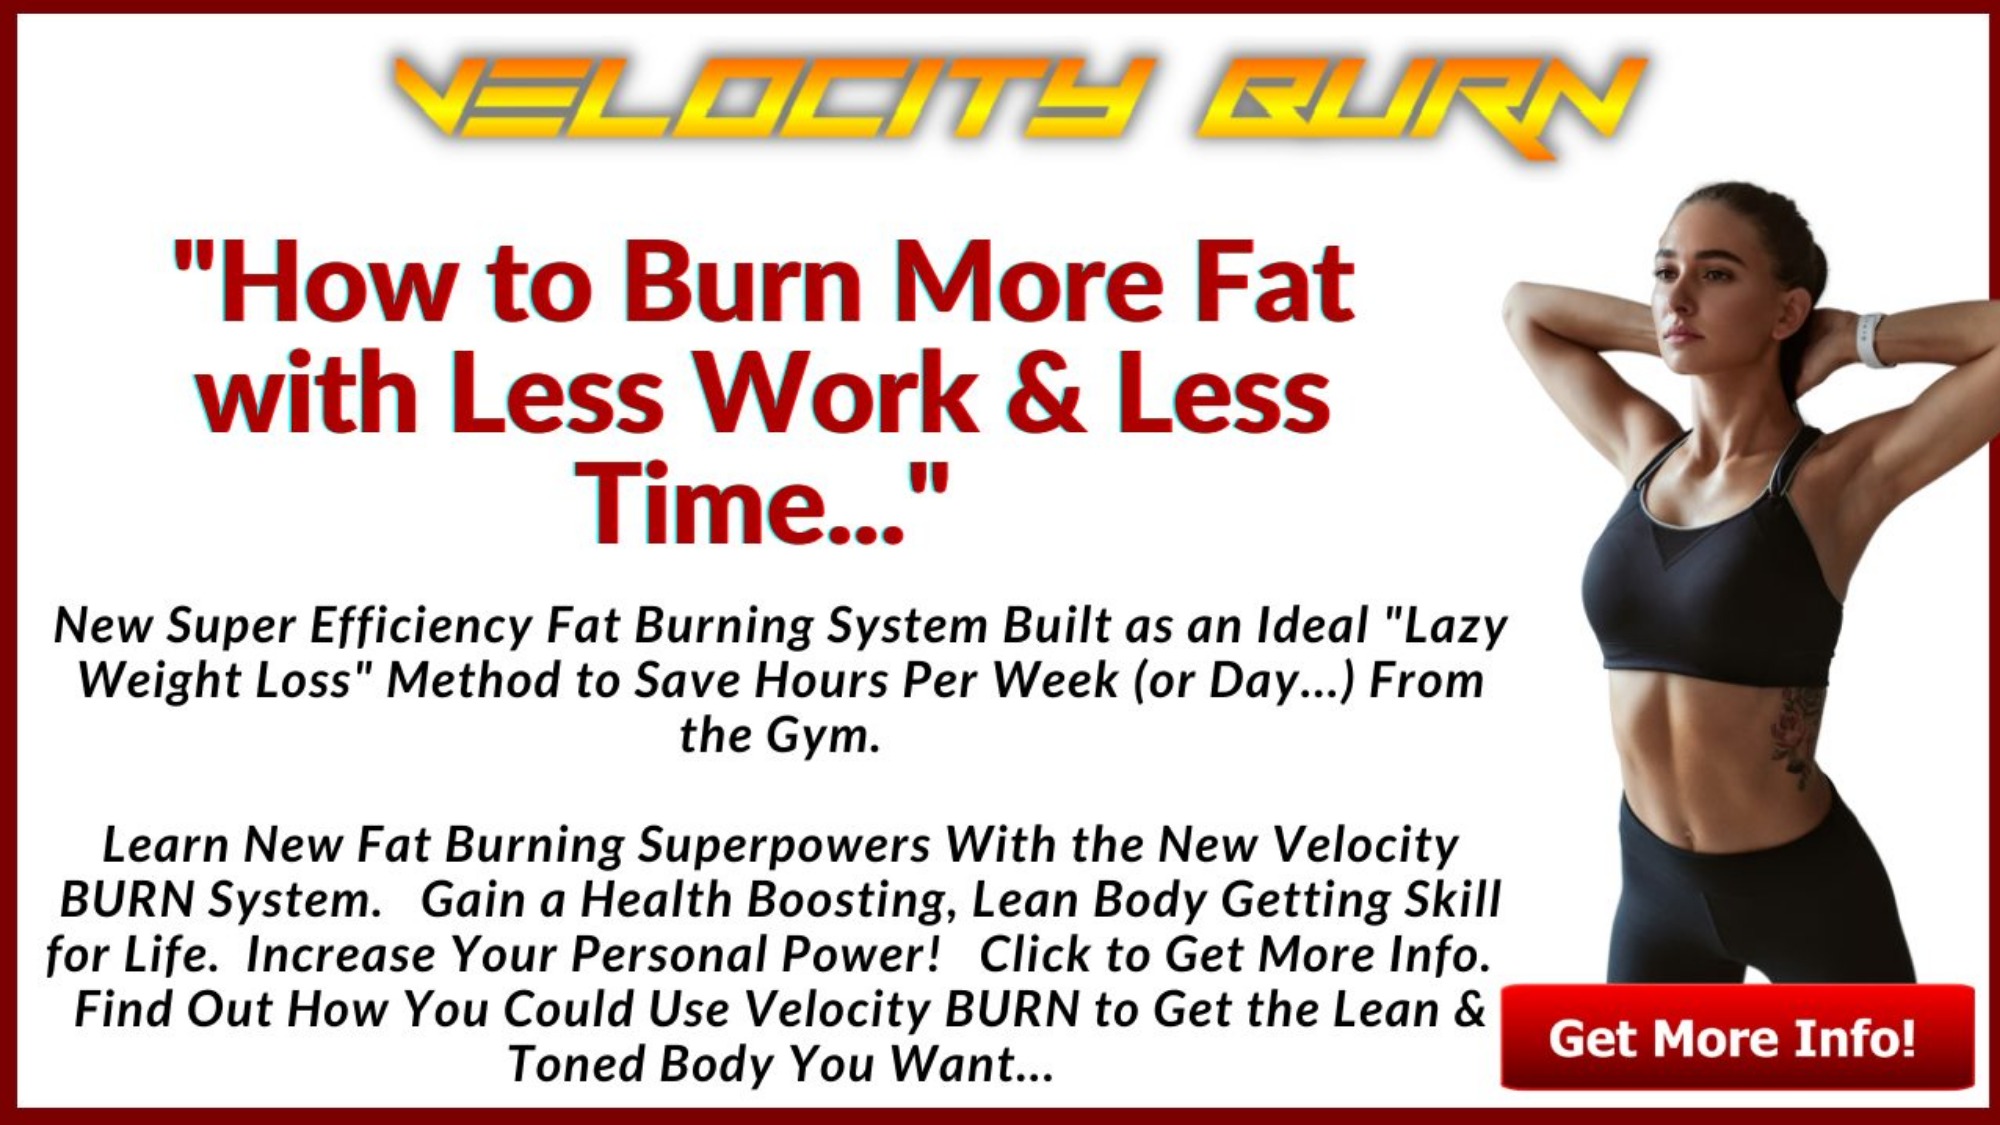 Ad-Velocity-BURN-How-to-Burn-More-Fat-with-Less-Work-and-Time-1680470451970